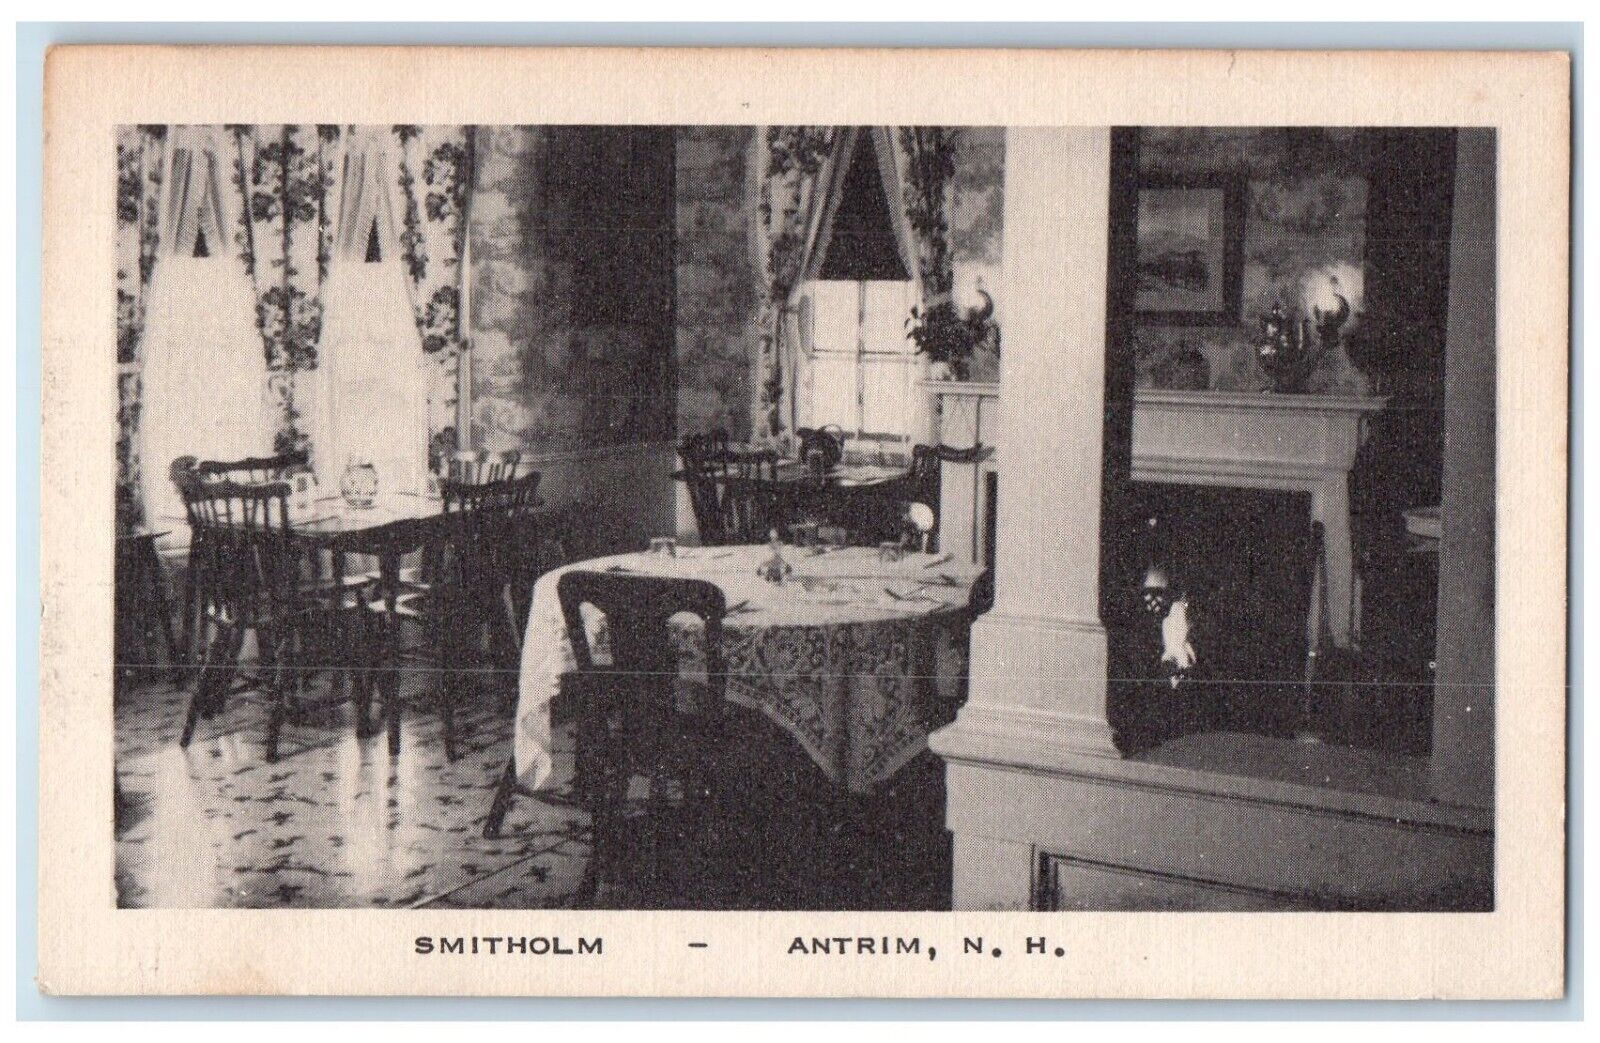 c1950's Dining Room and Chimney Smitholm Antrim New Hampshire NH Postcard